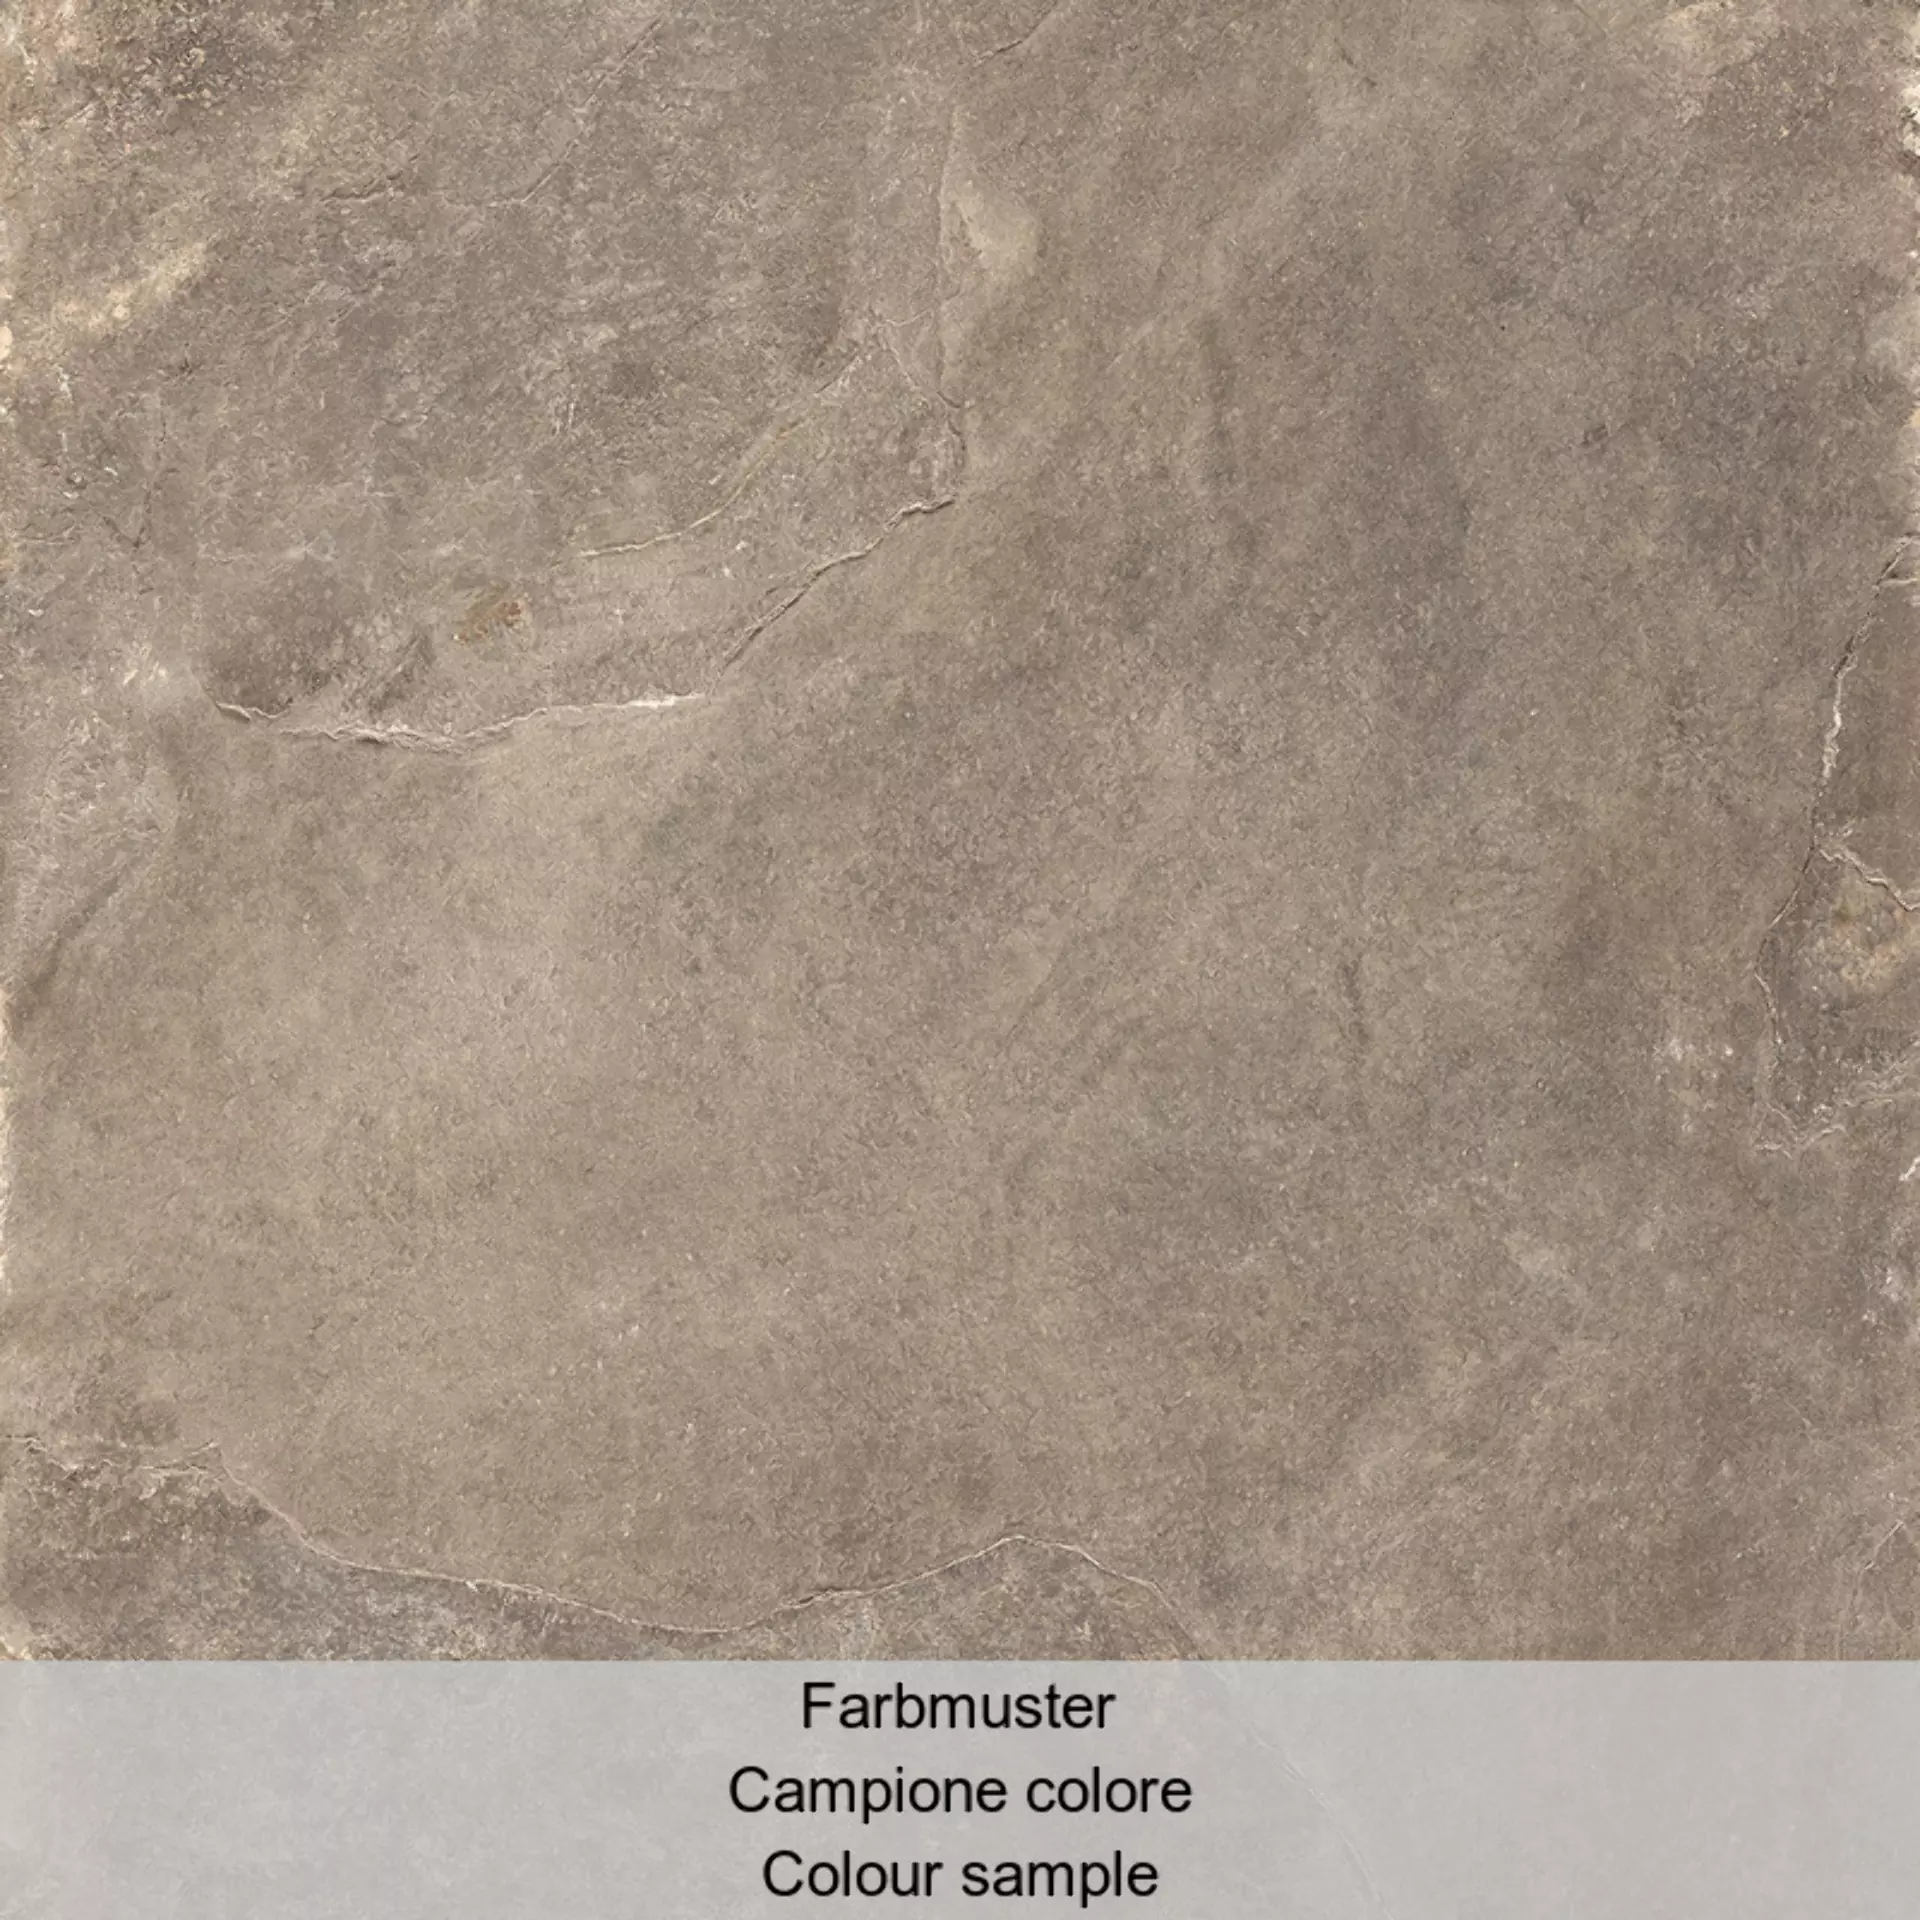 Rondine Ardesie Taupe Lappato J87236 60x60cm rectified 9,5mm